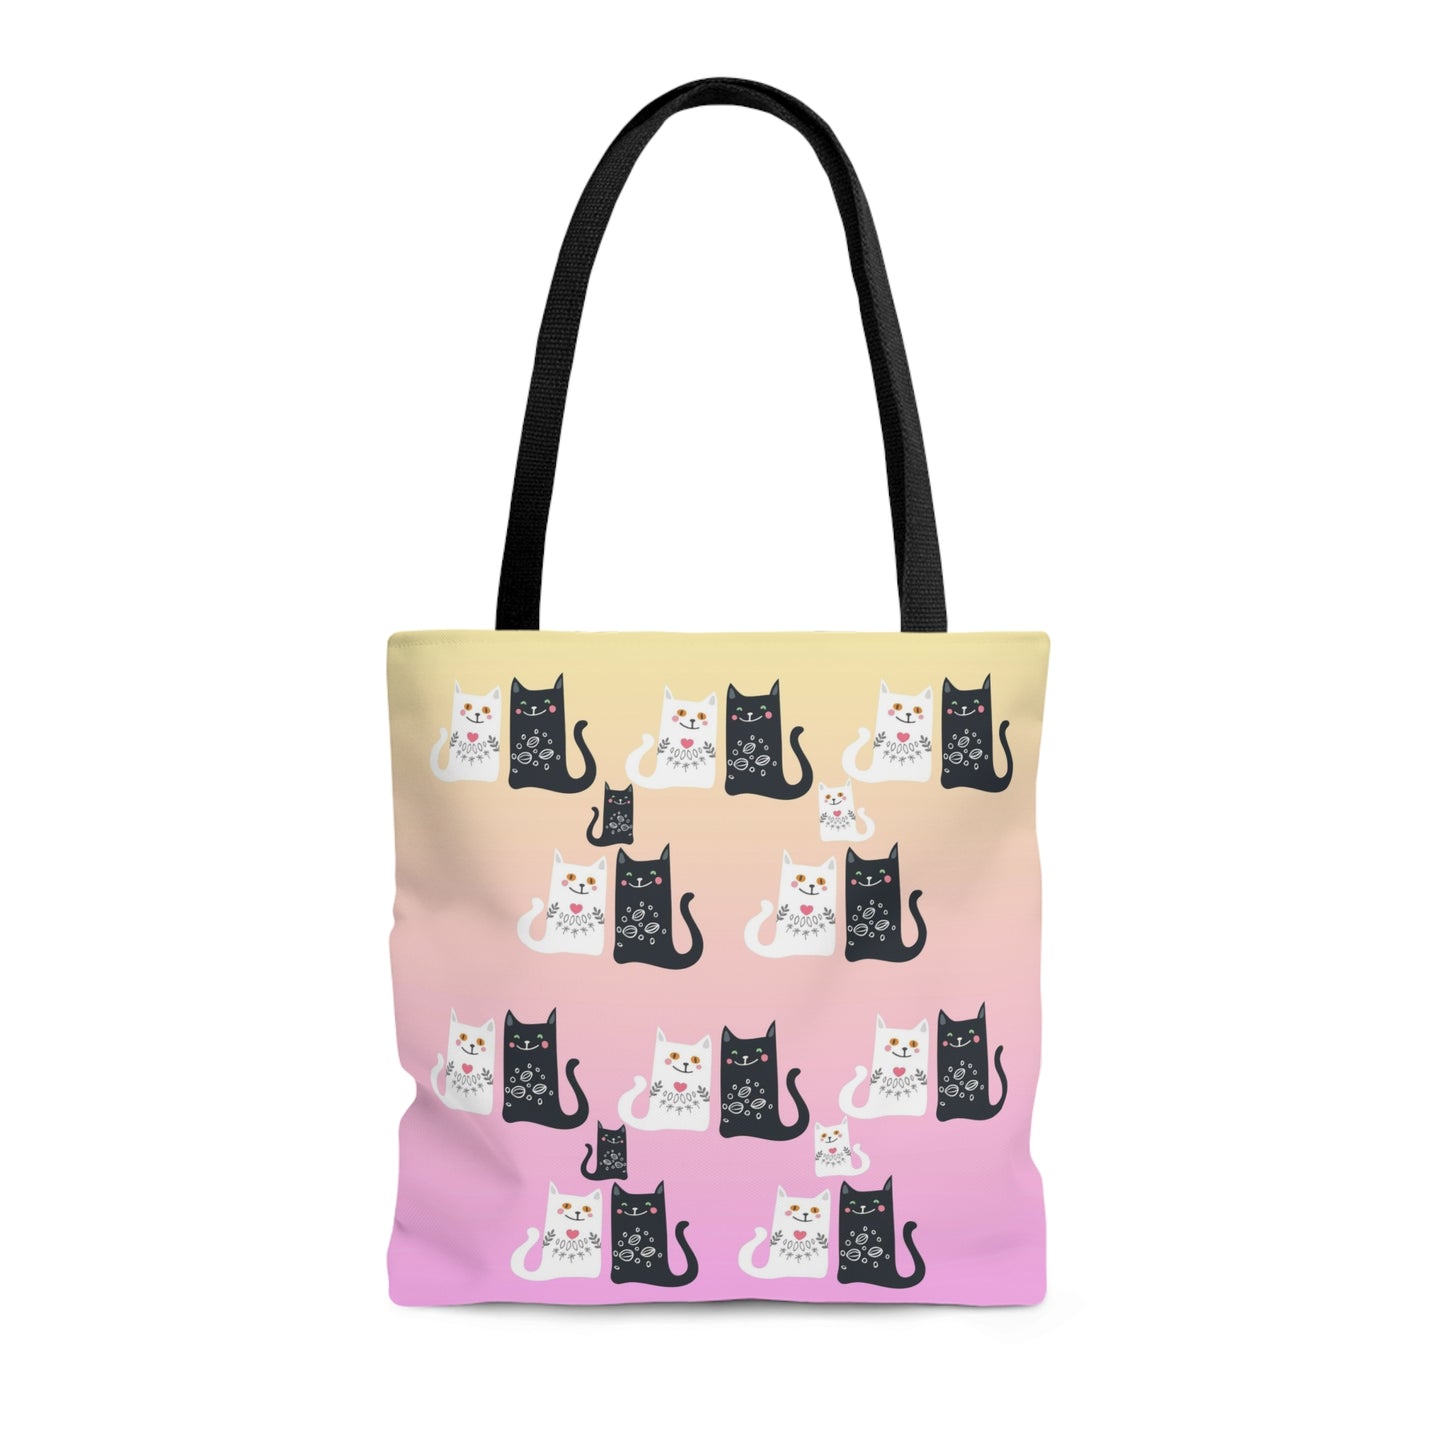 Happy Together Tote Bag